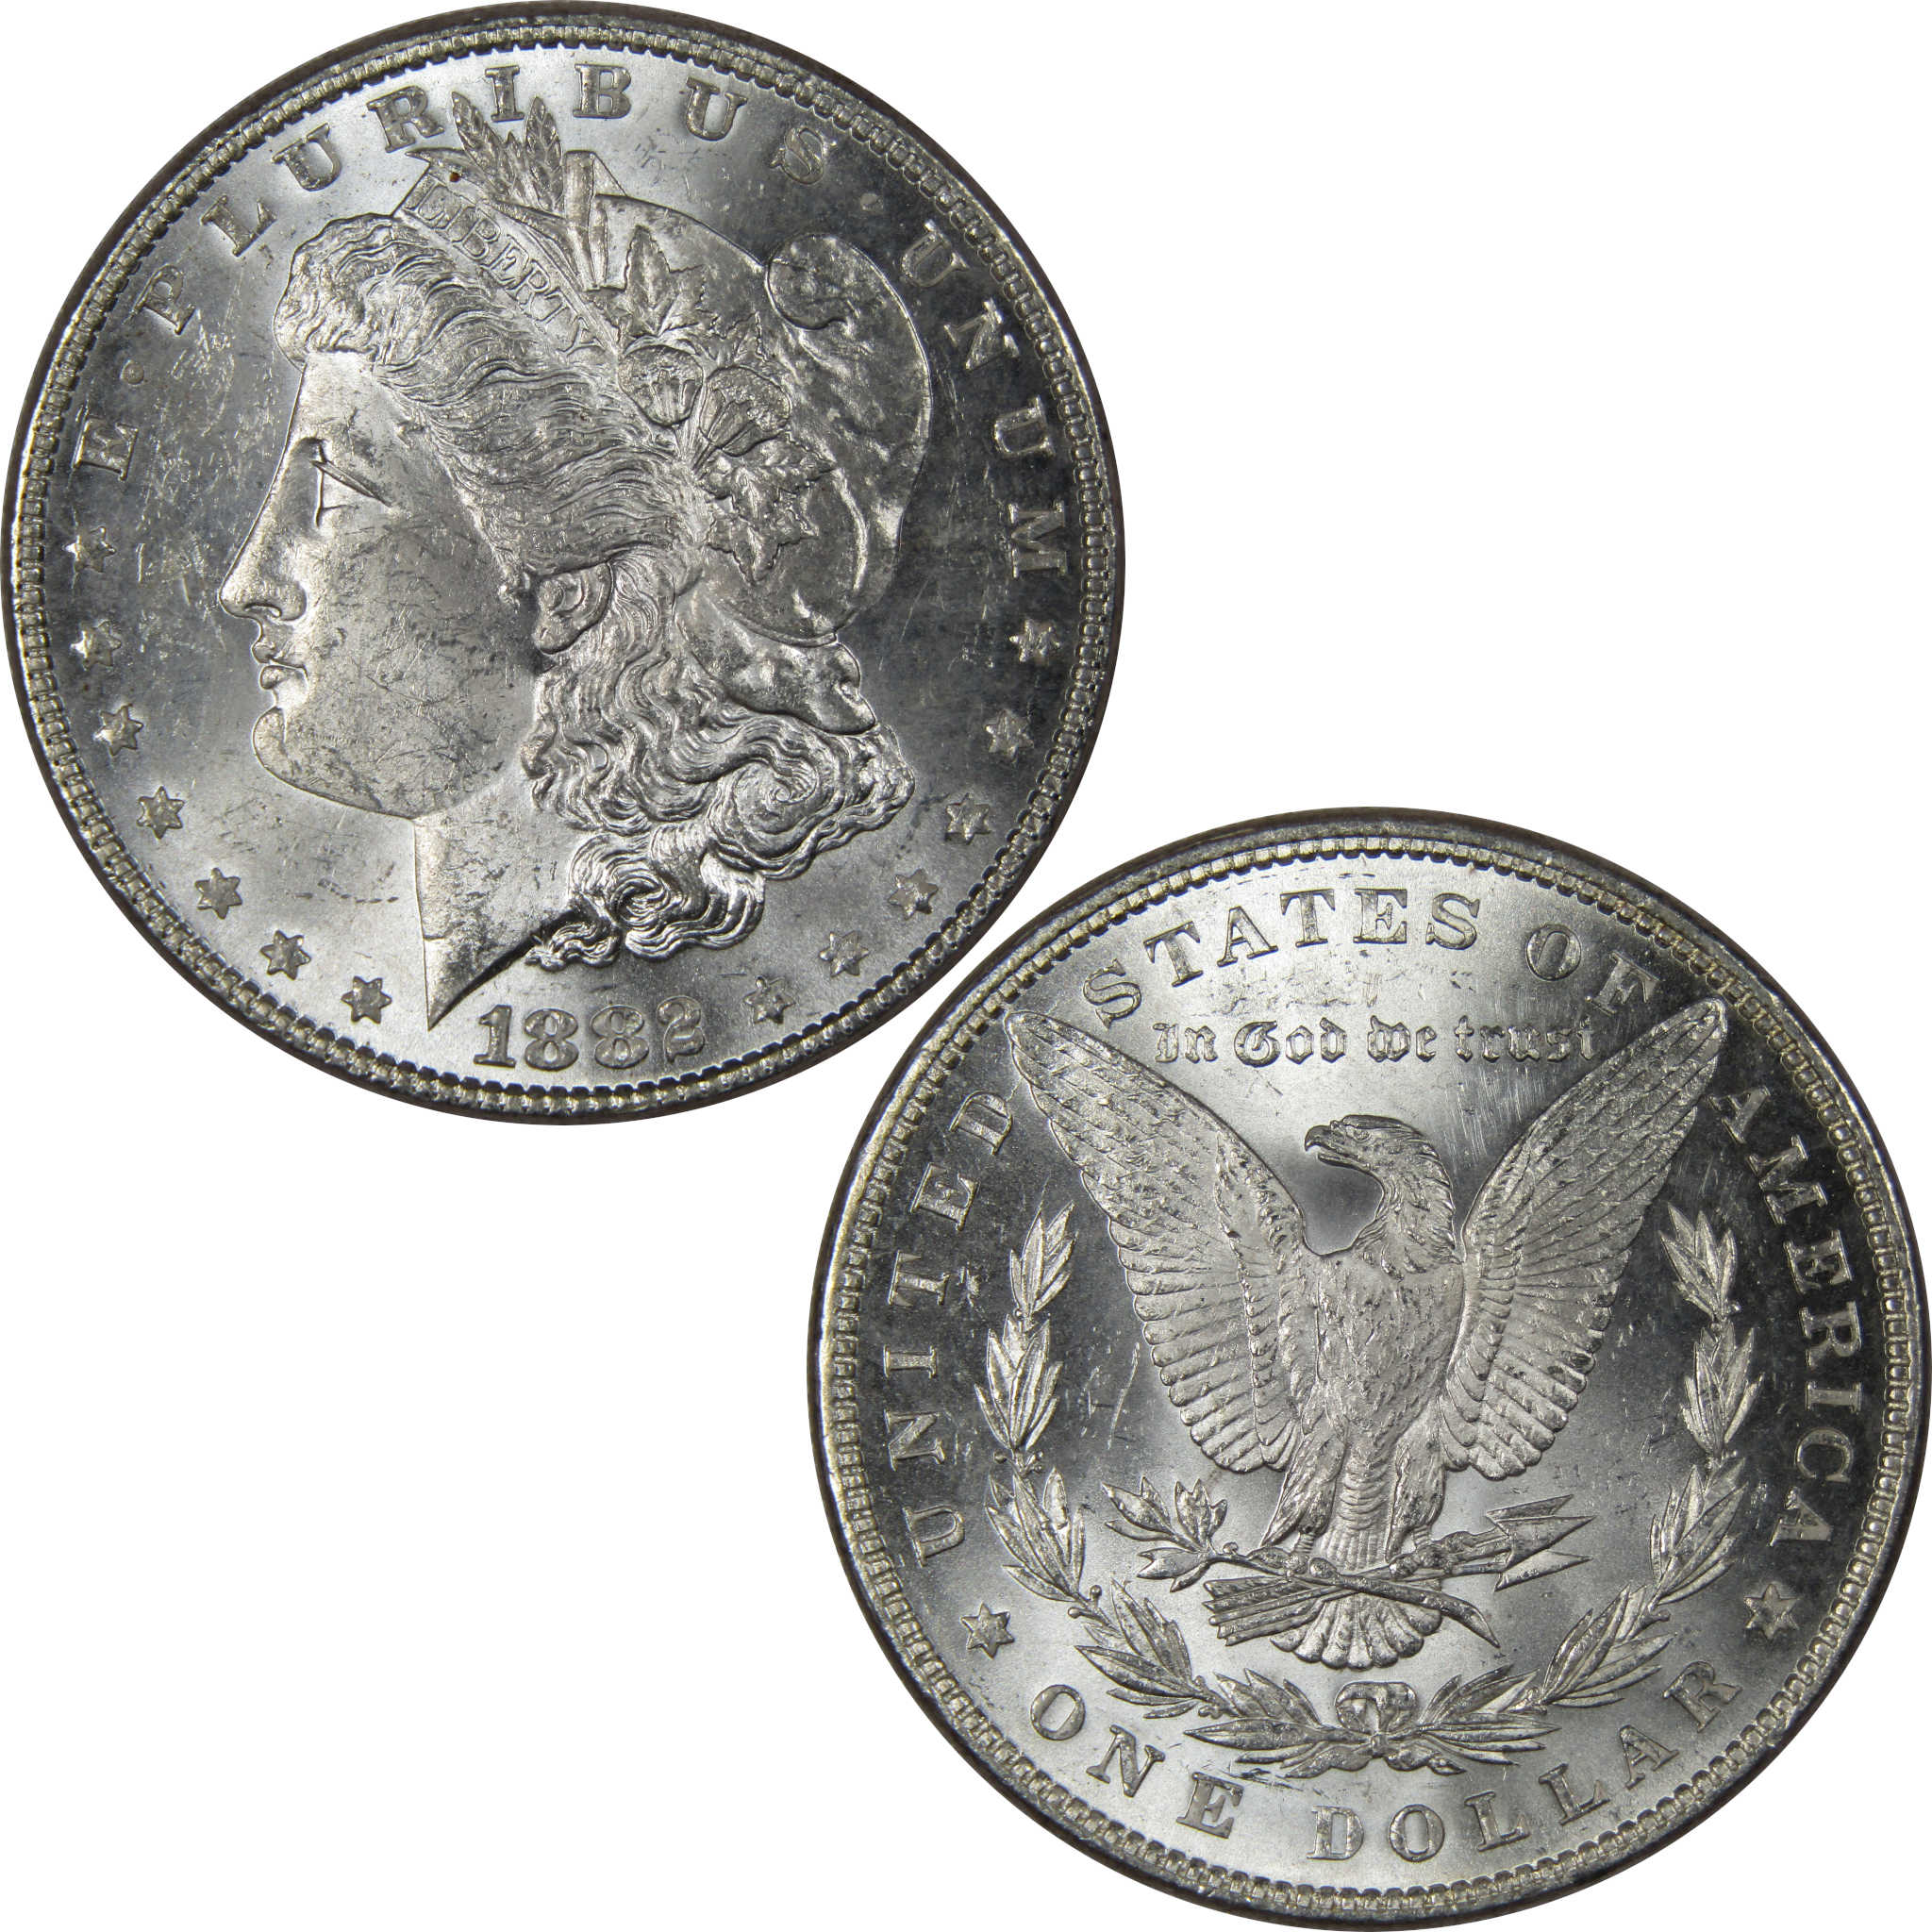 1882 Morgan Dollar BU Uncirculated Mint State 90% Silver SKU:IPC9644 - Morgan coin - Morgan silver dollar - Morgan silver dollar for sale - Profile Coins &amp; Collectibles